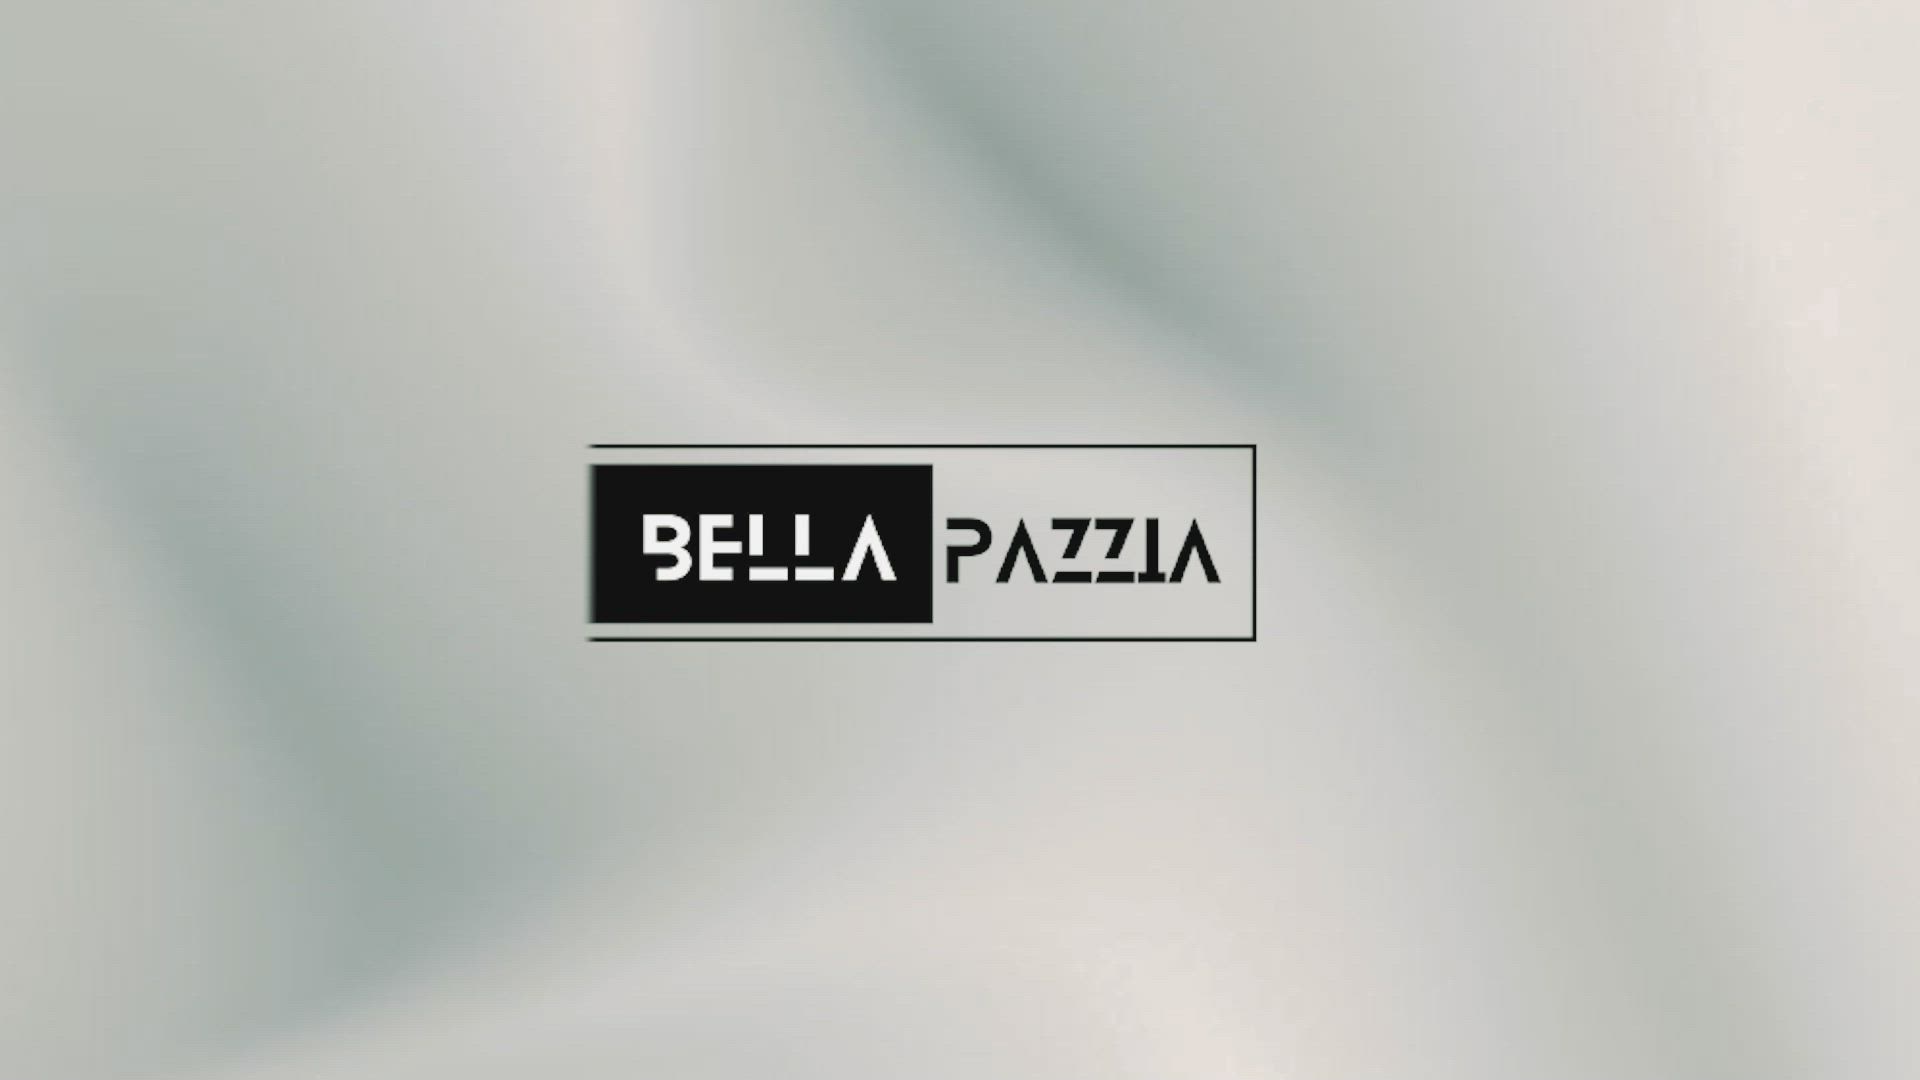 Pregnant porn video with onlyfans model bellapazzia <strong>@bellapazzia</strong>